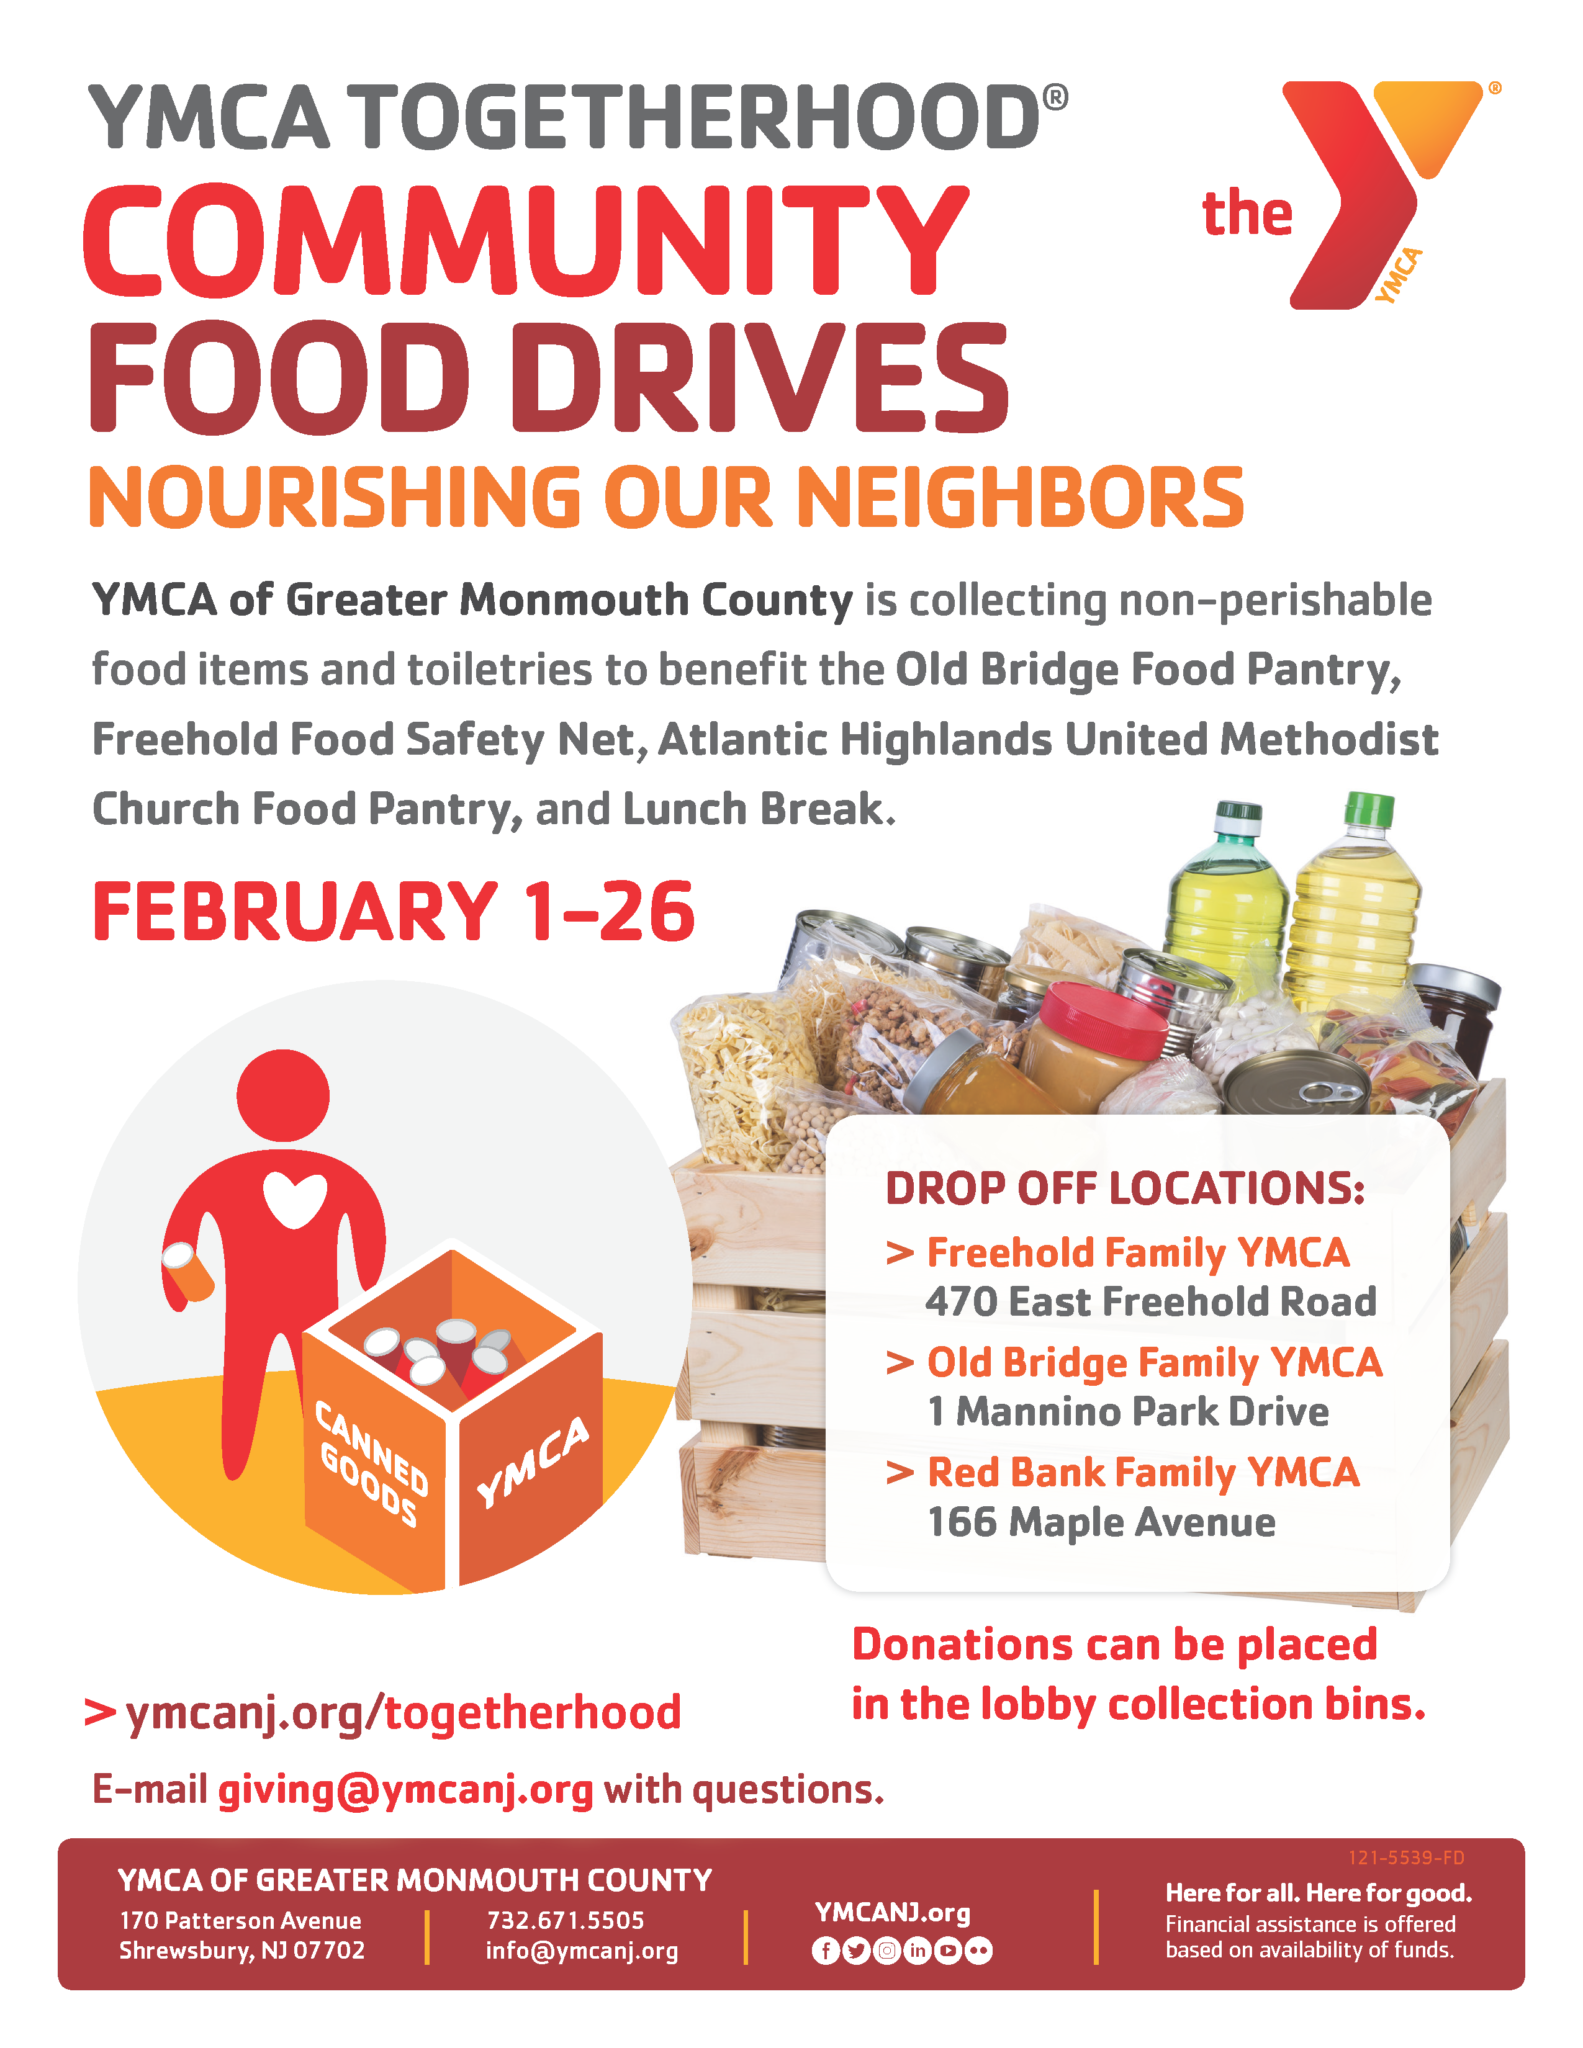 Community Food Drive YMCA of Greater Monmouth County